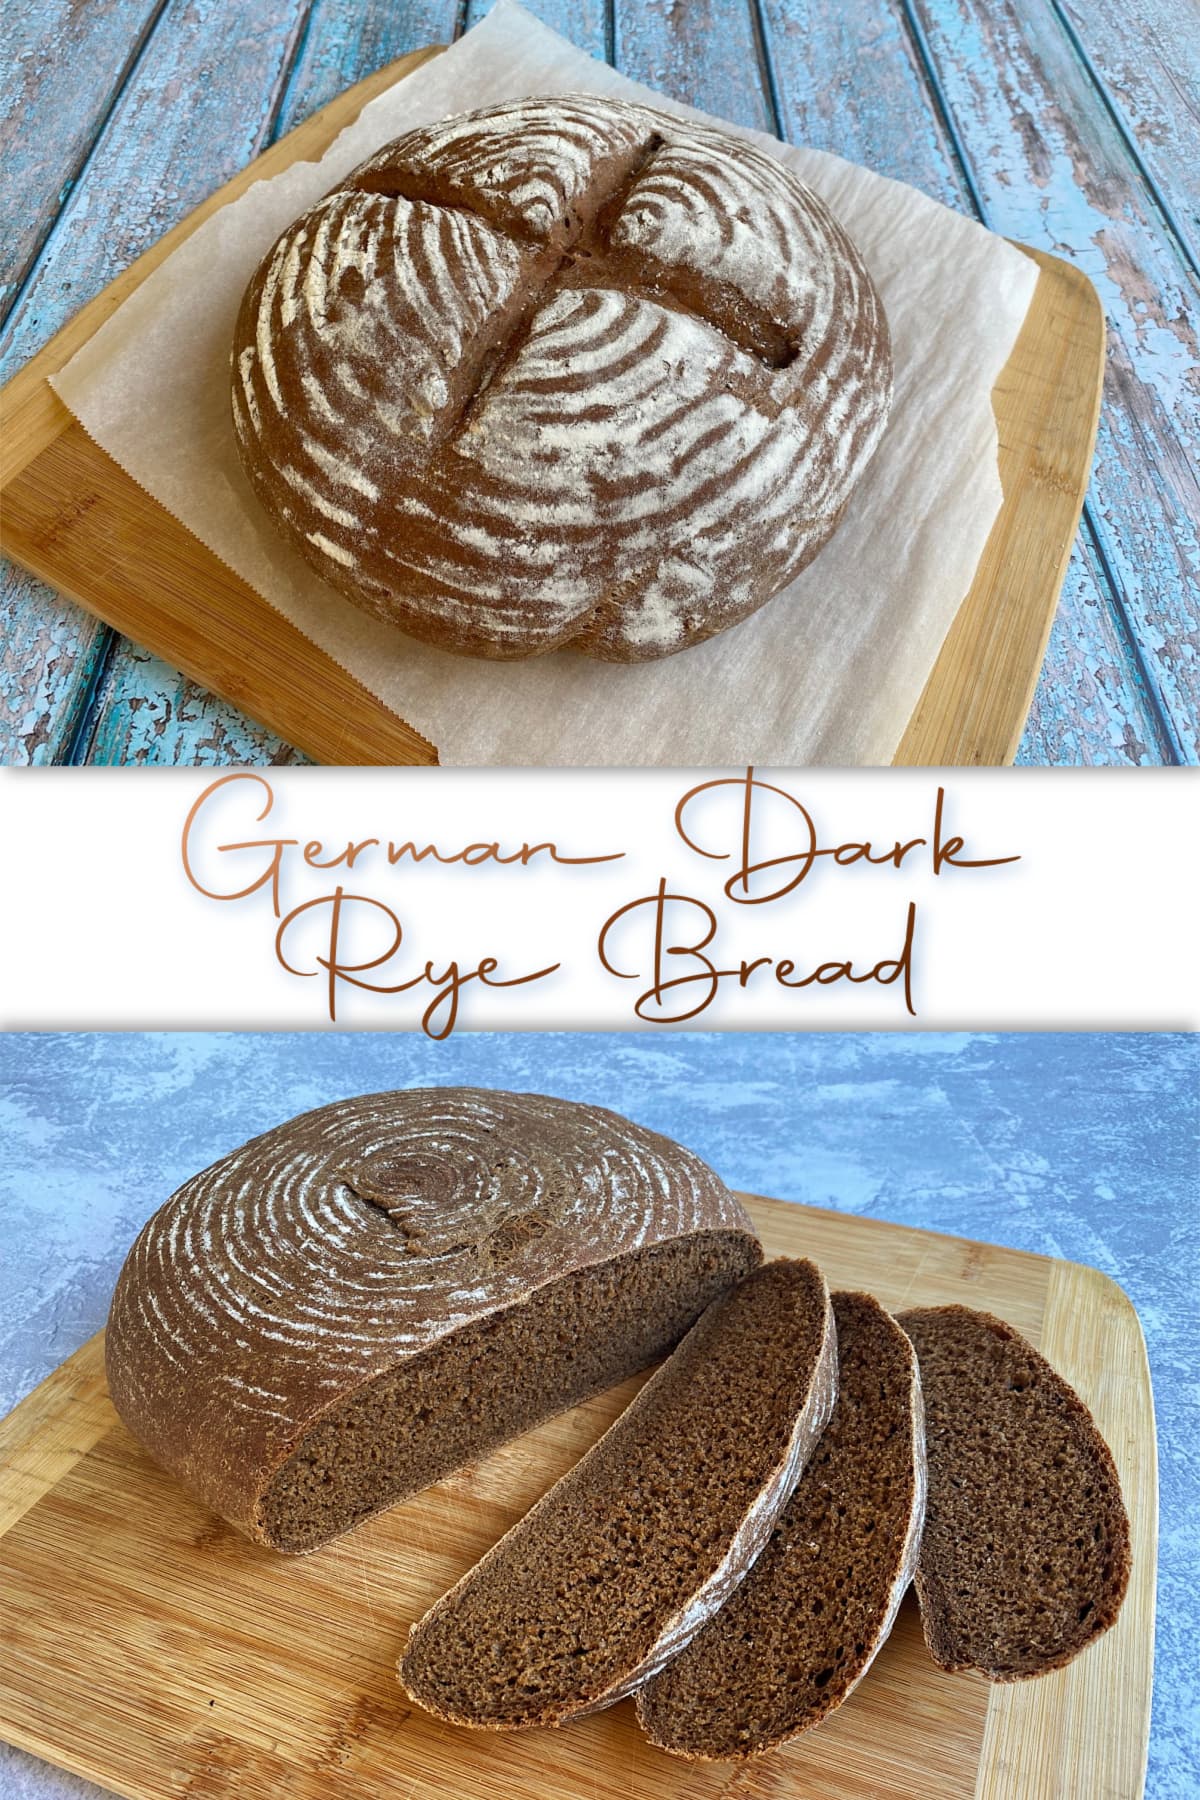 2-panel collage showing baked rye bread and sliced rye bread. Pin text reads "German Dark Rye Bread"